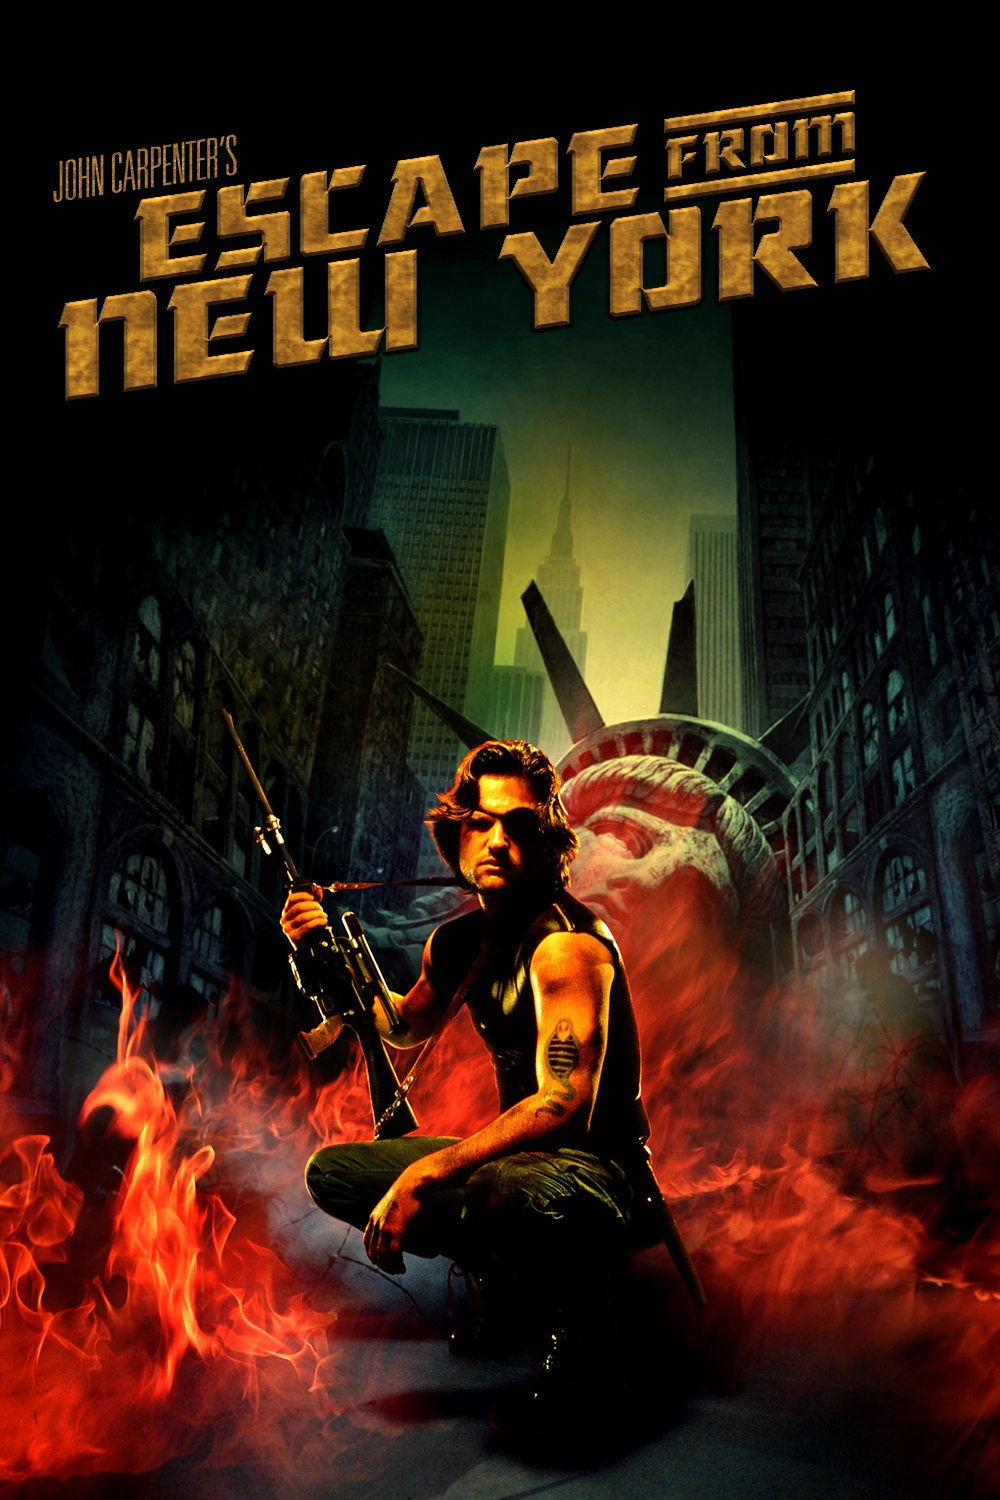 Escape-From-New-York-1981-DVD